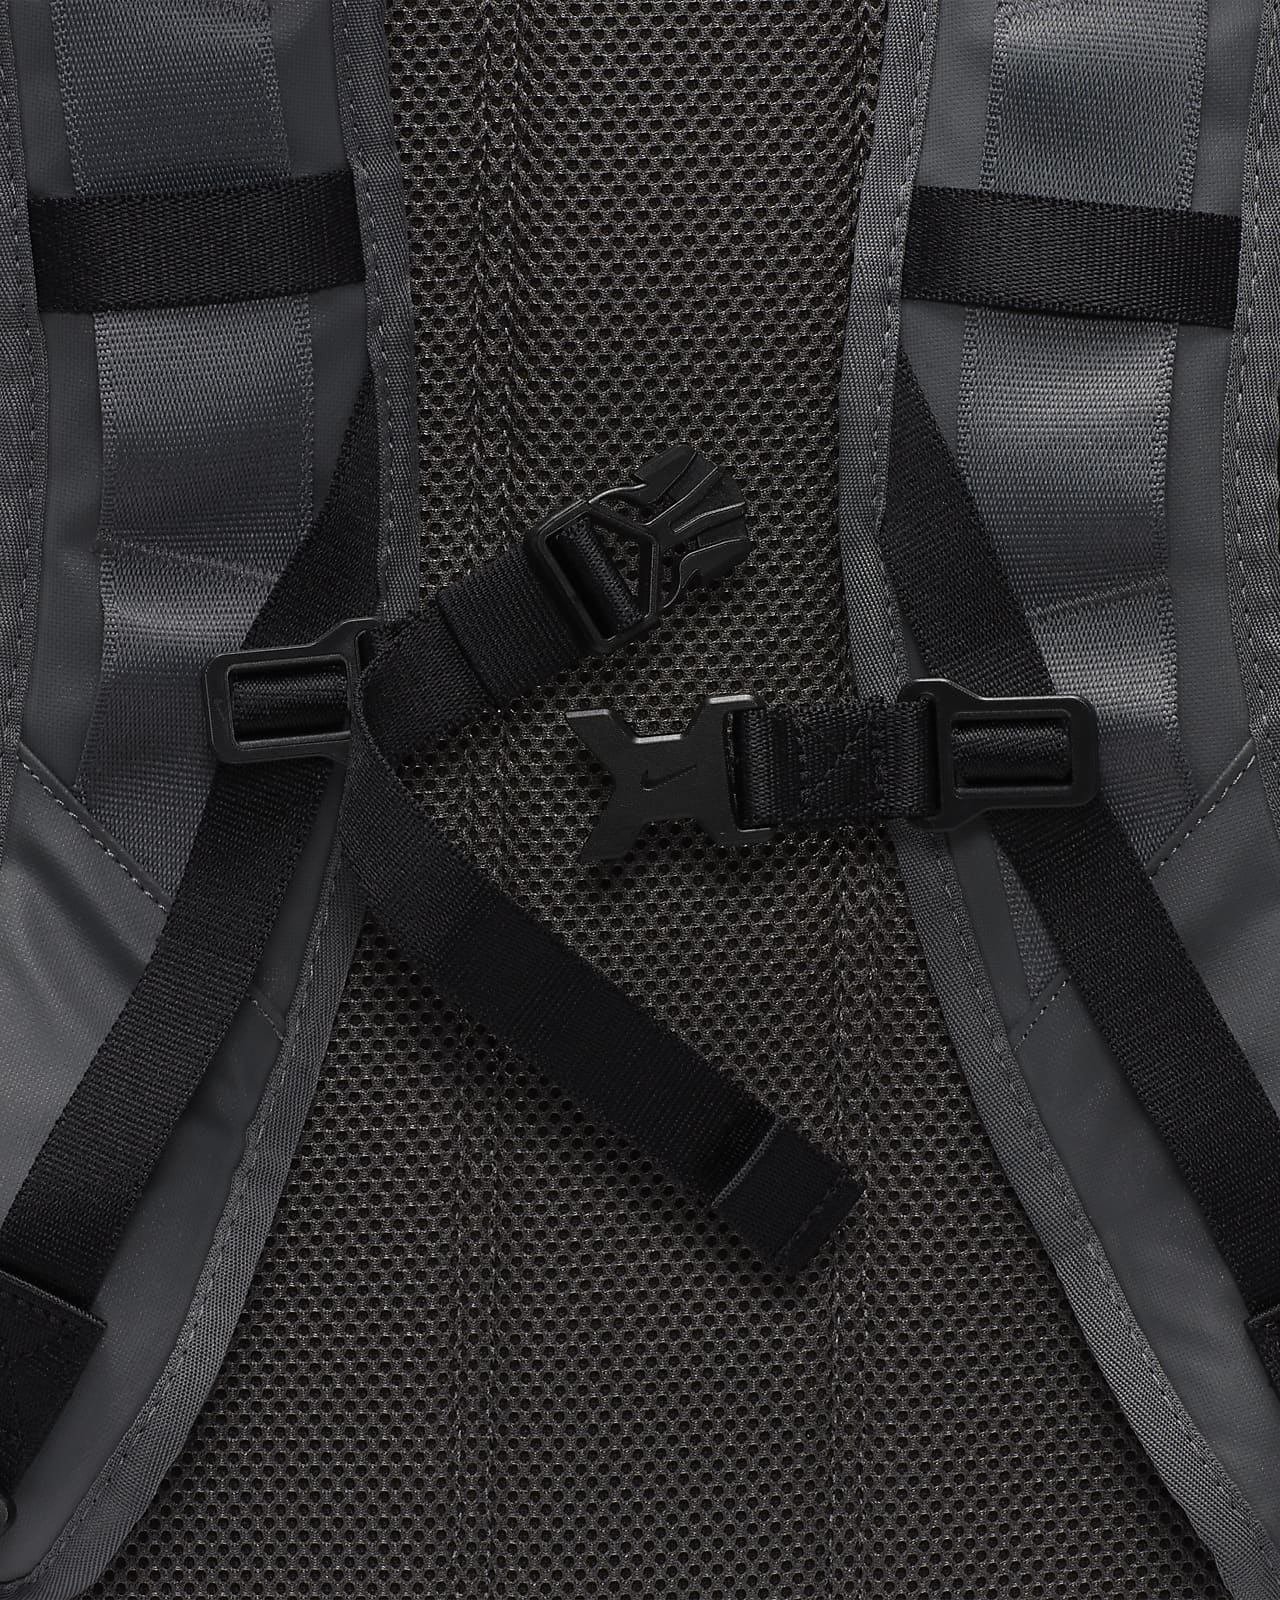 Nike Storm-FIT ADV Utility Speed Training Backpack (27L).